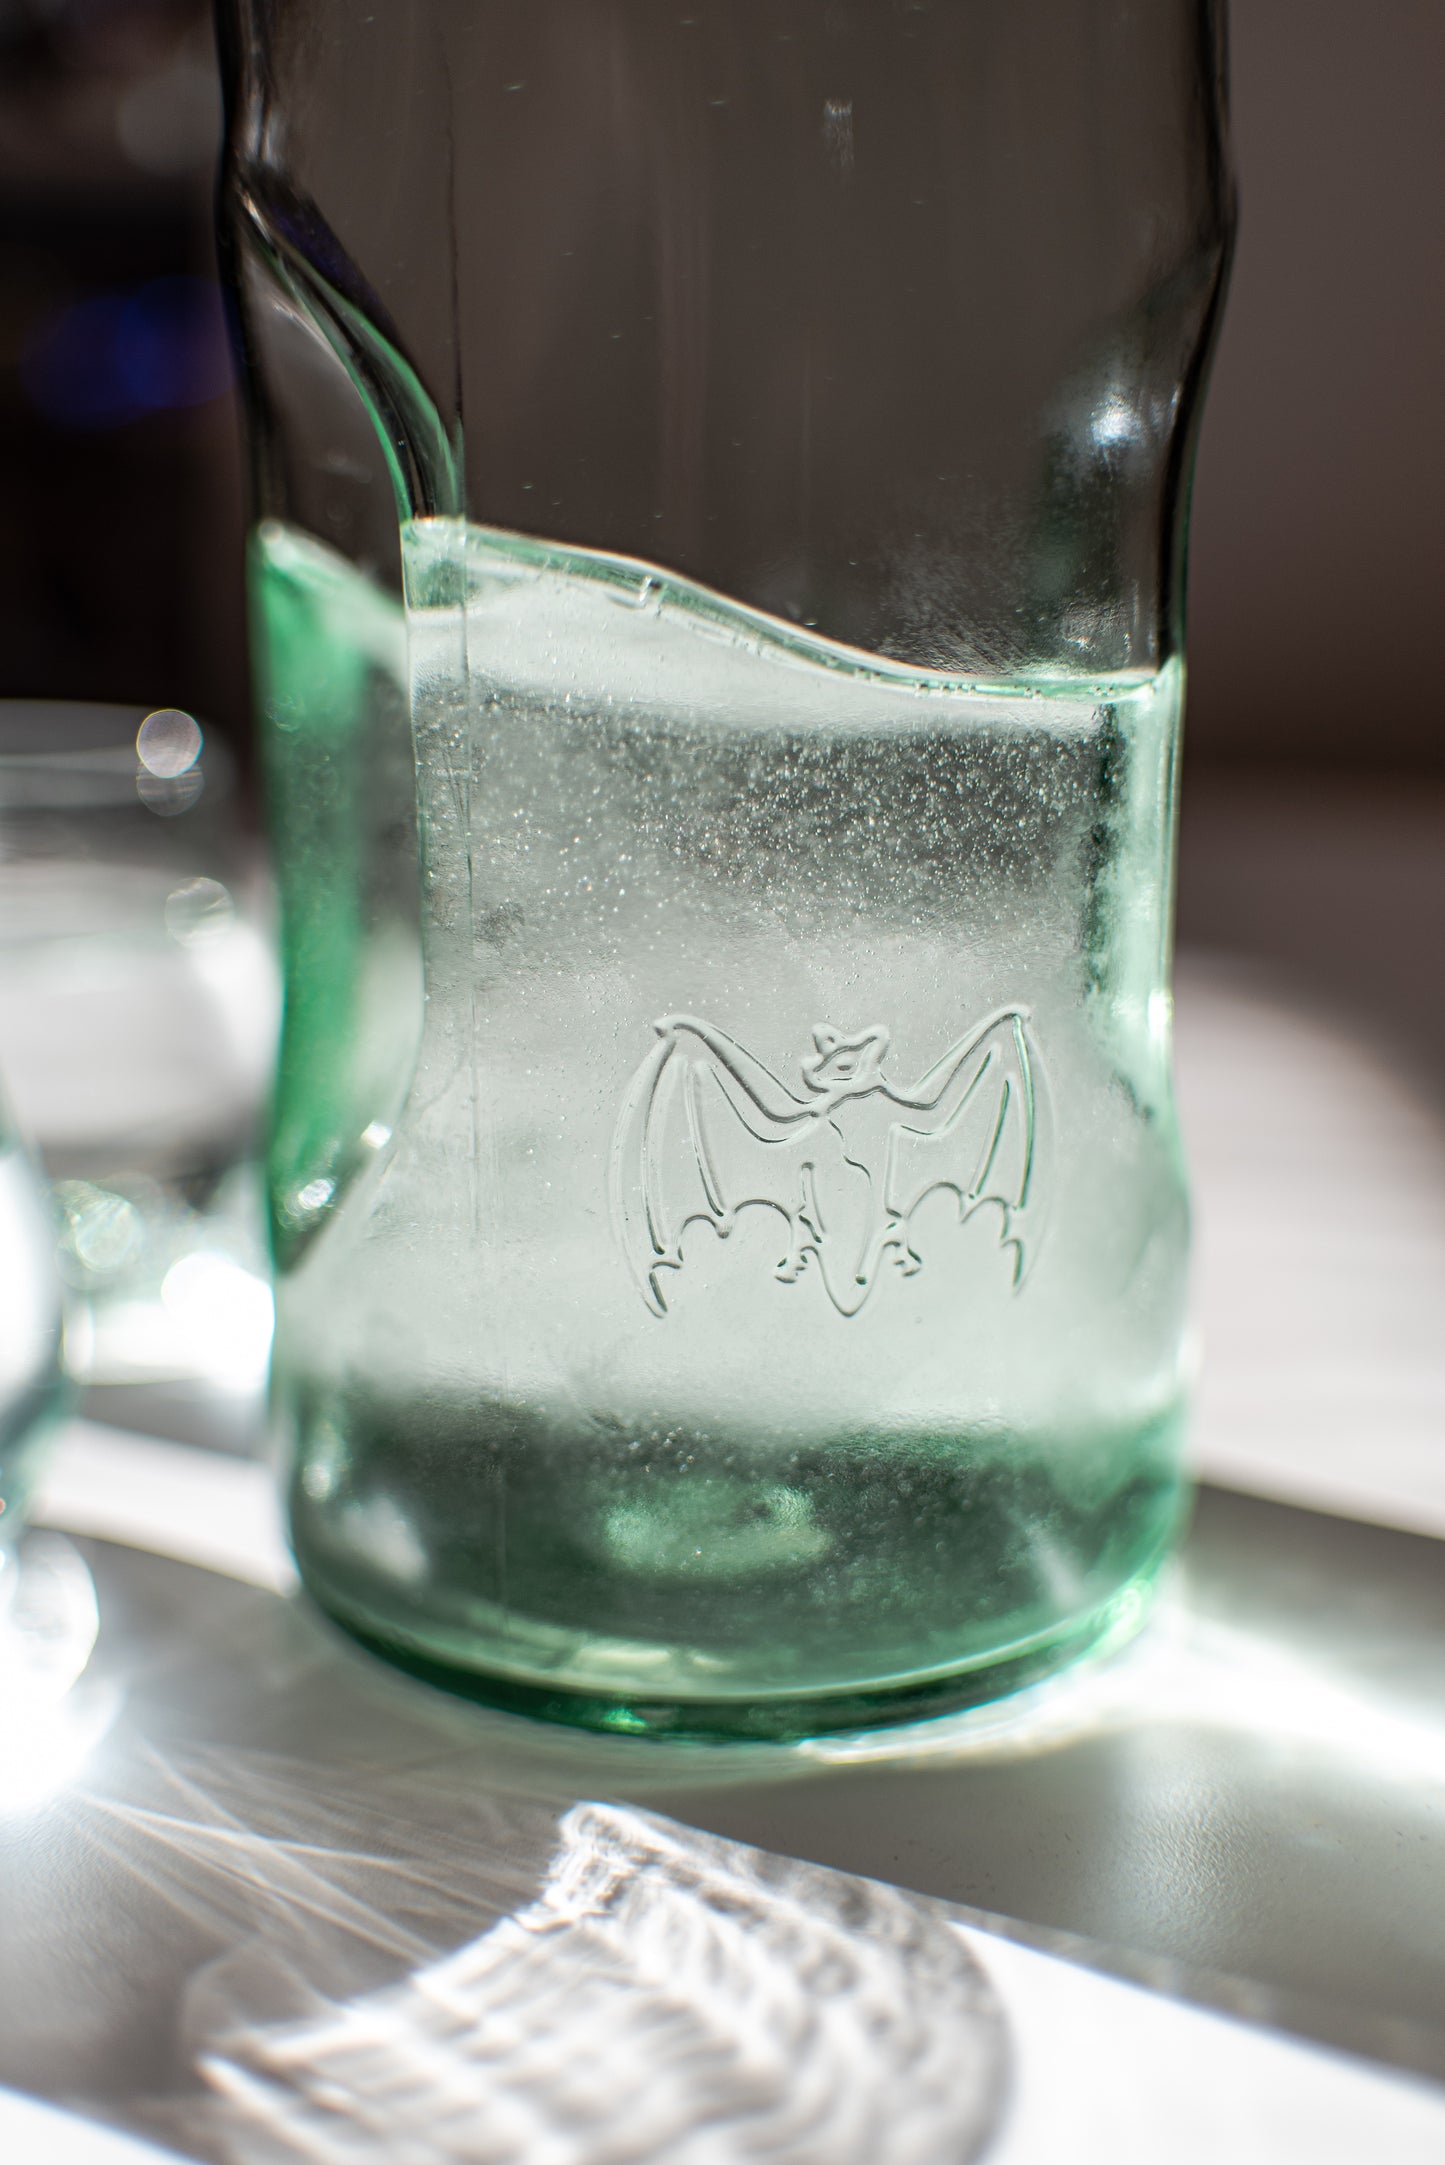 COLA Glass Set: Limited Edition